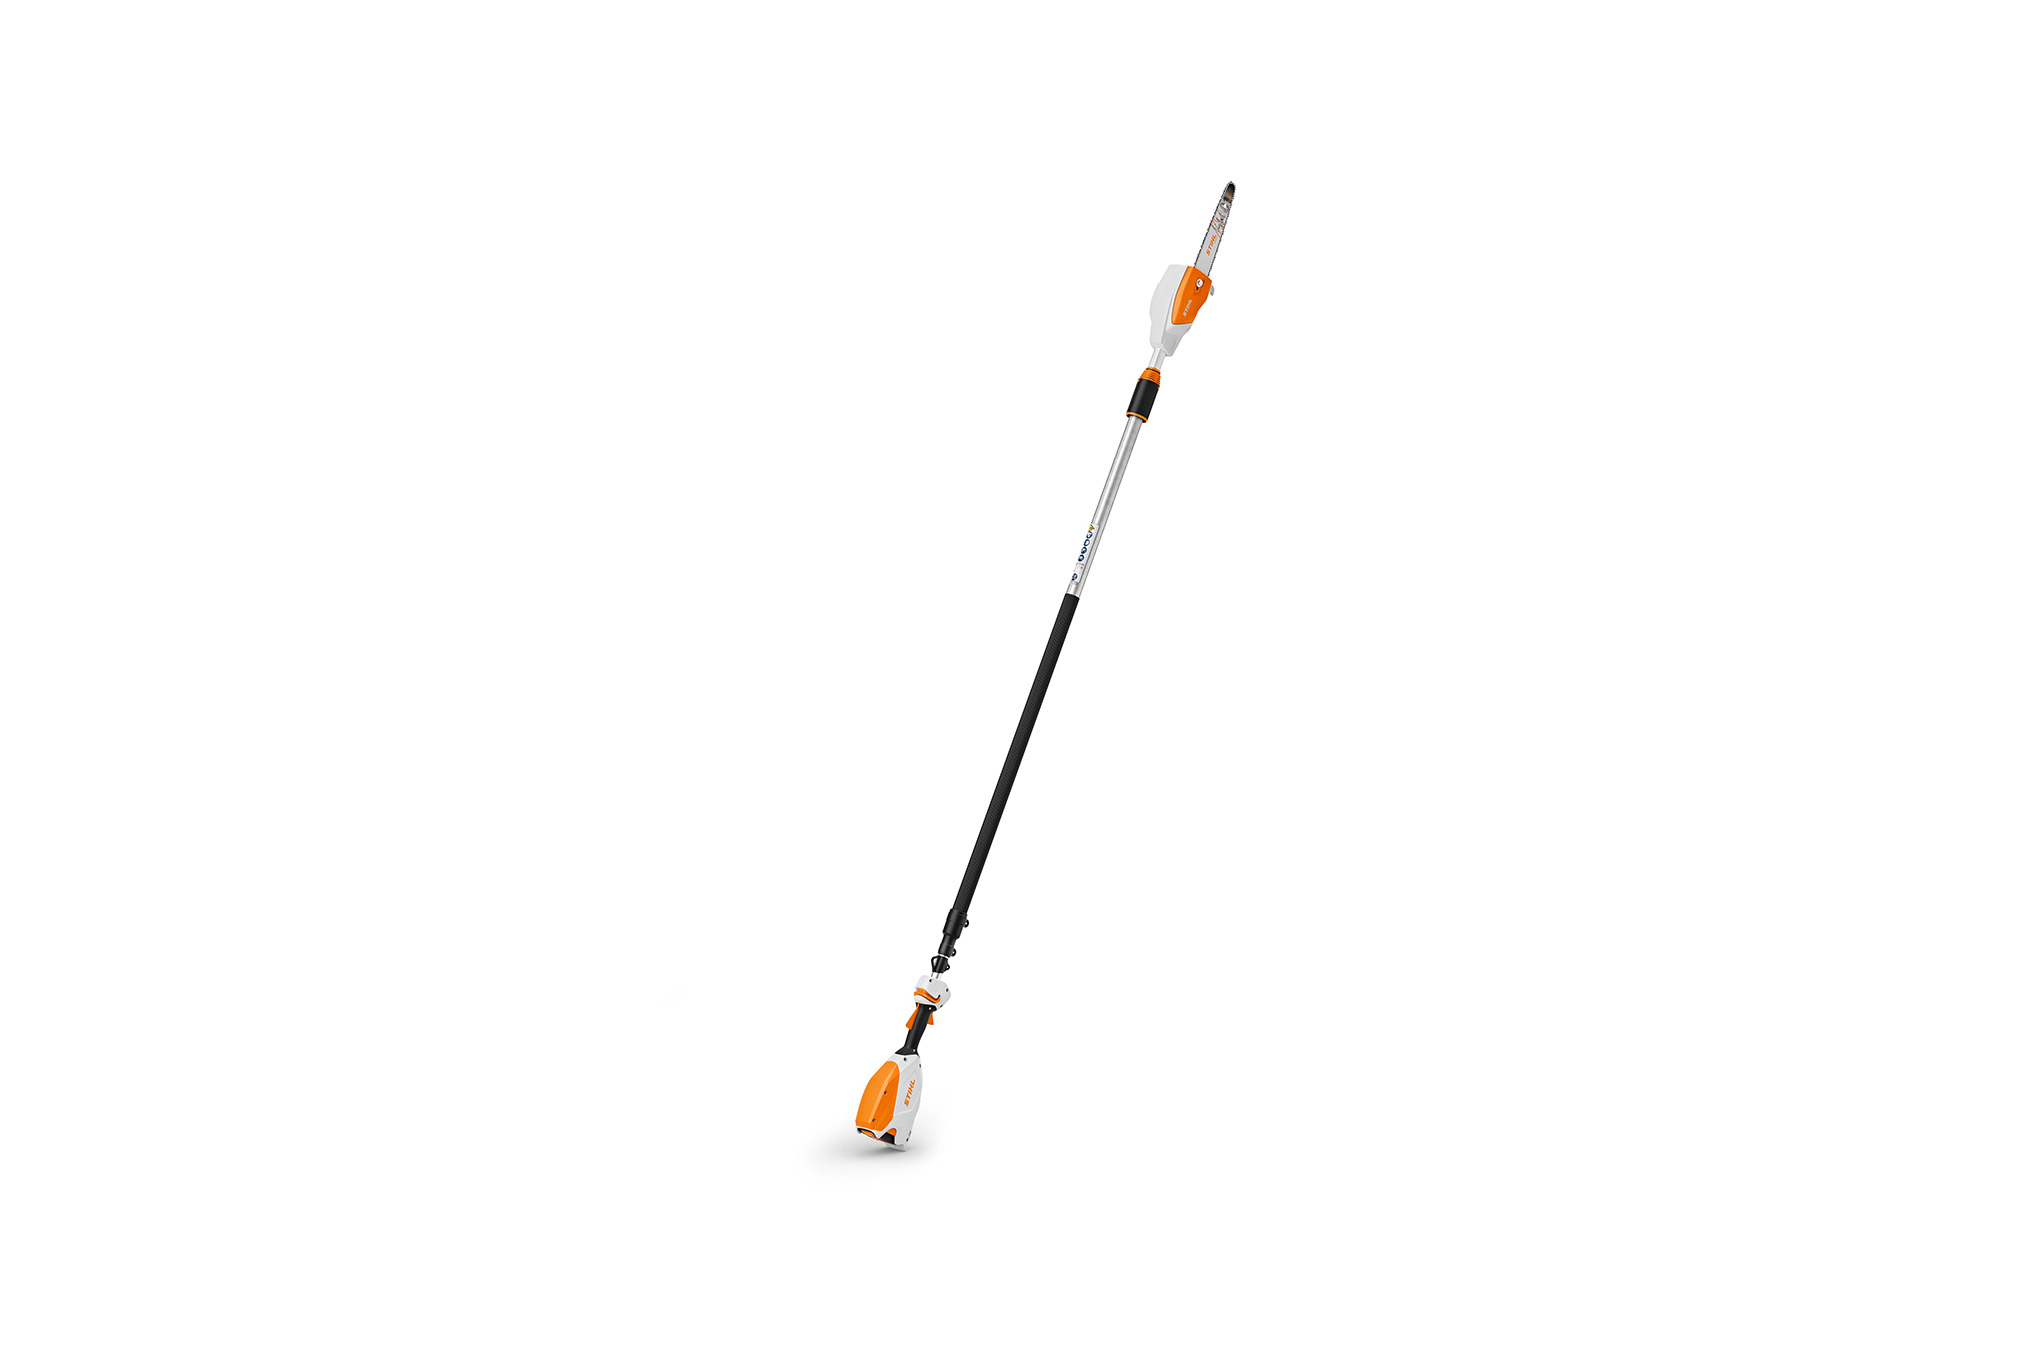 STIHL HTA 86 cordless pole pruner from the AP-System